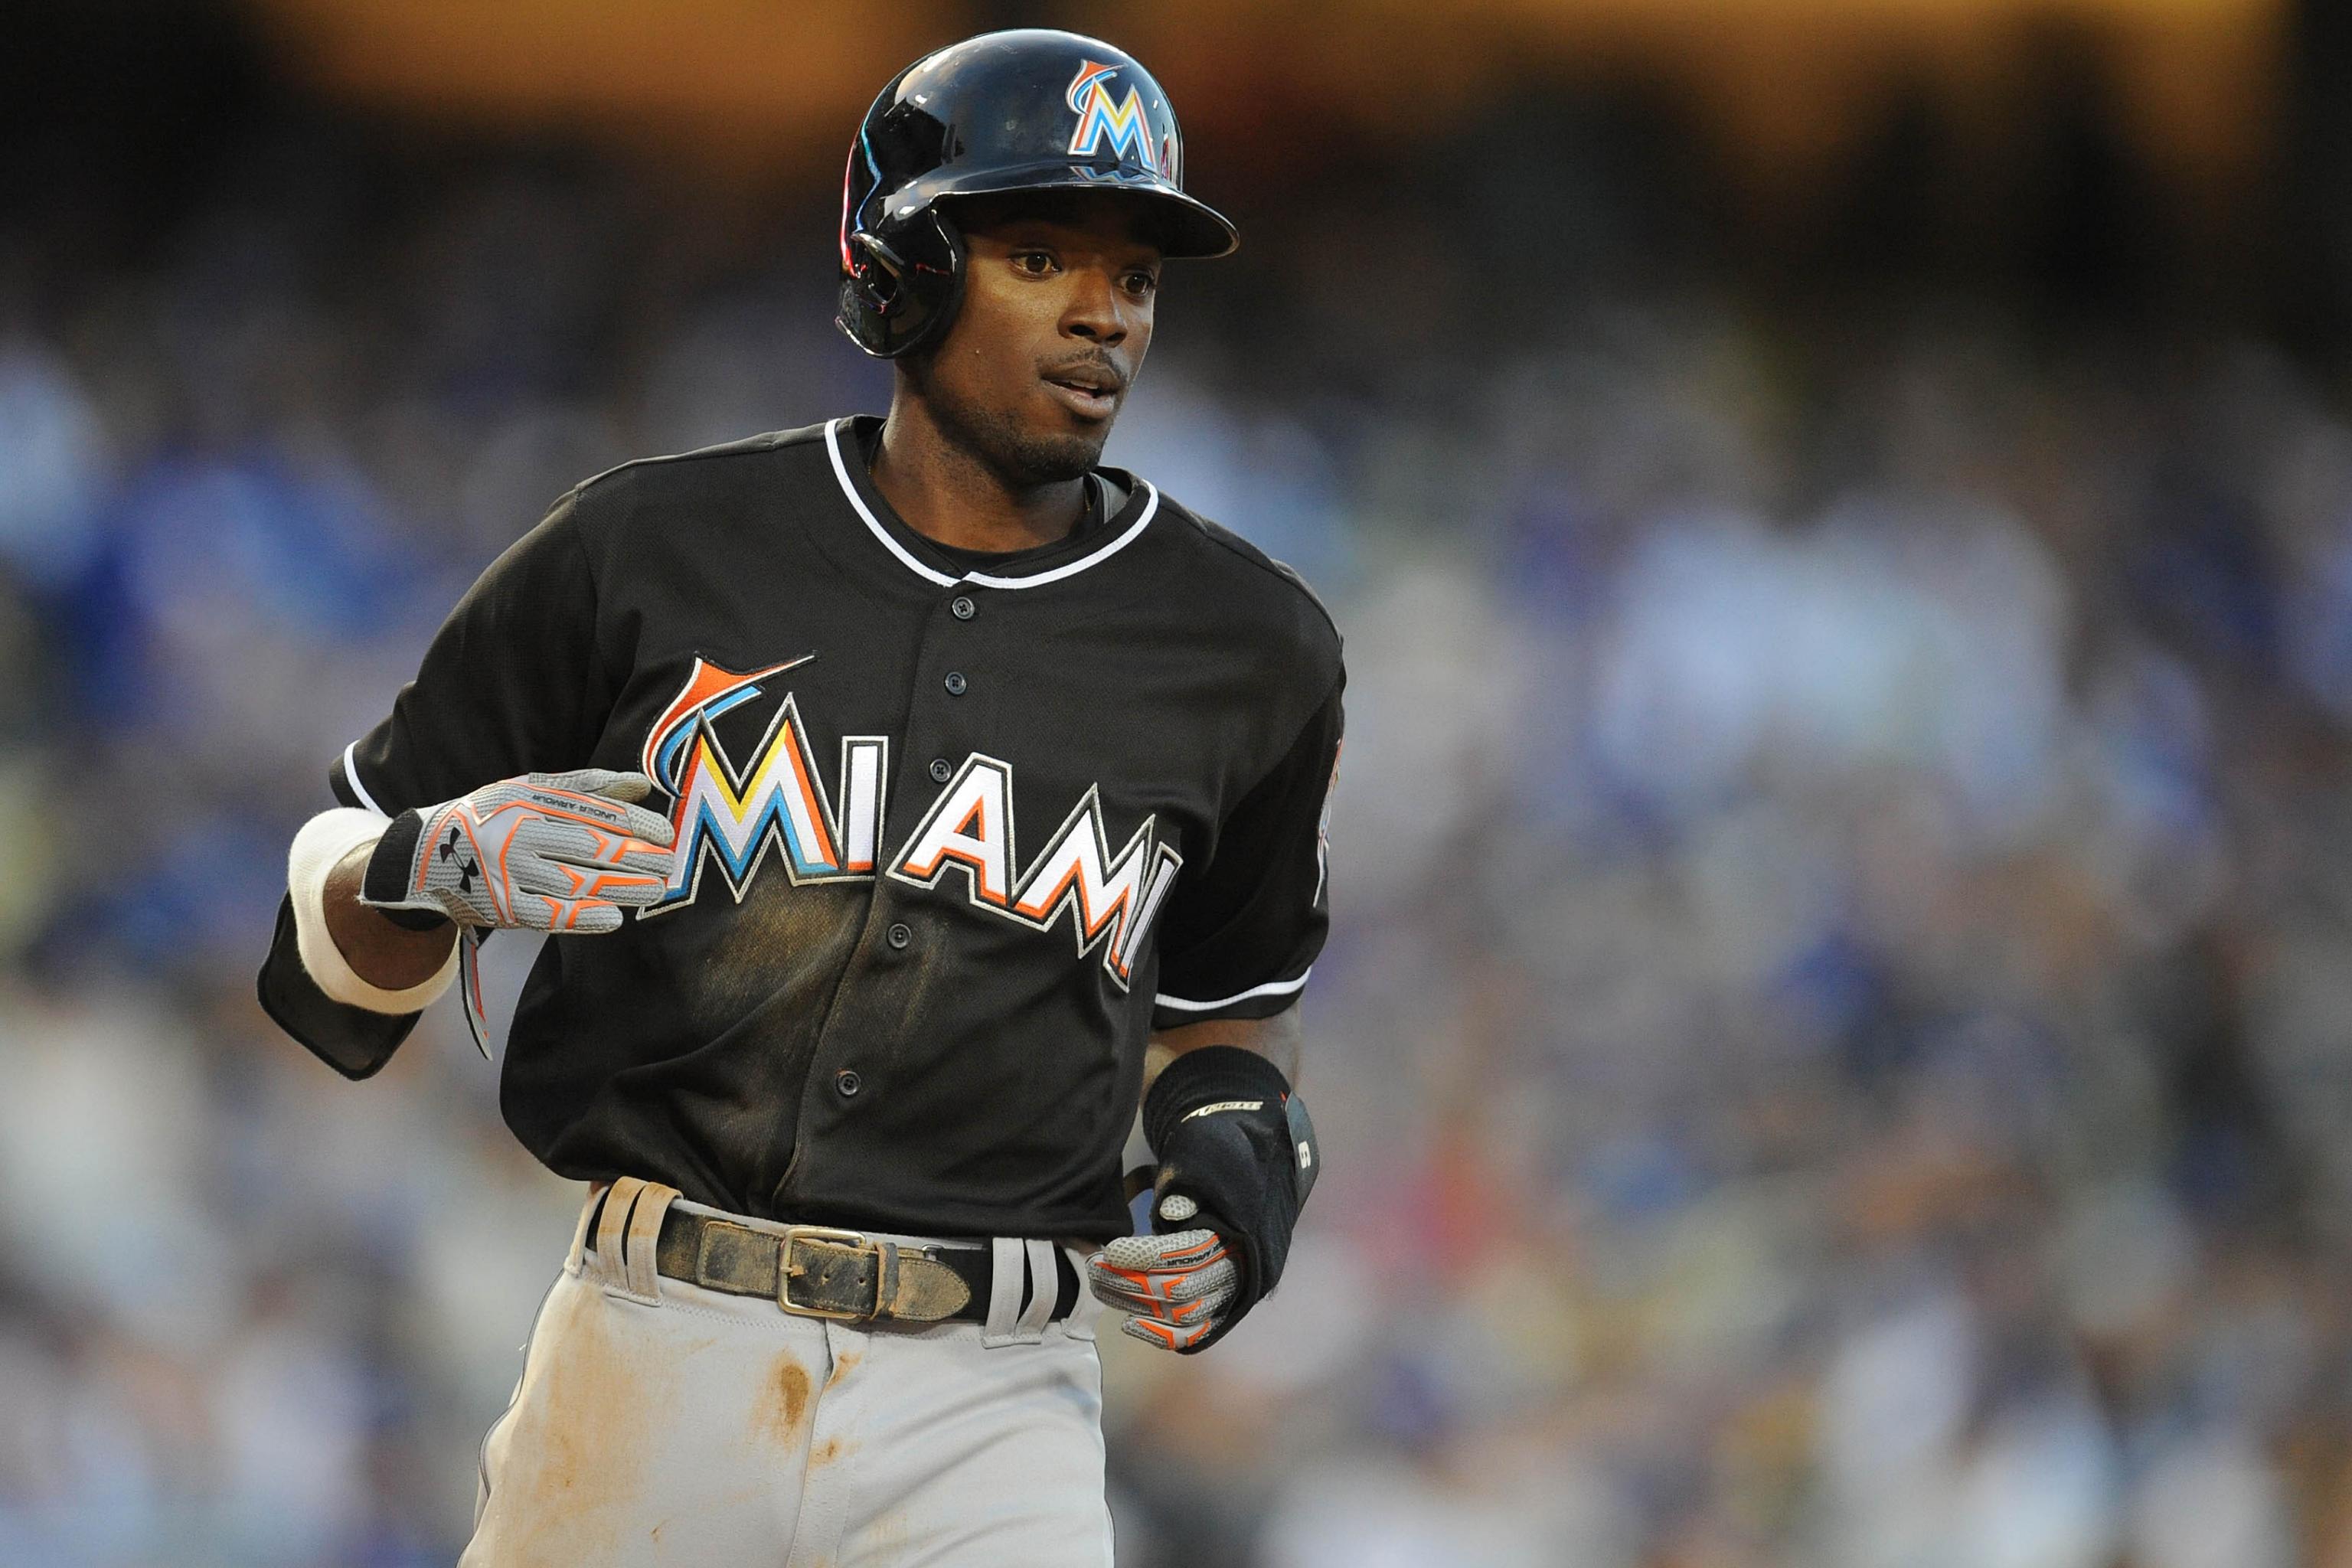 Dee Gordon gets another chance, maybe his last - Los Angeles Times